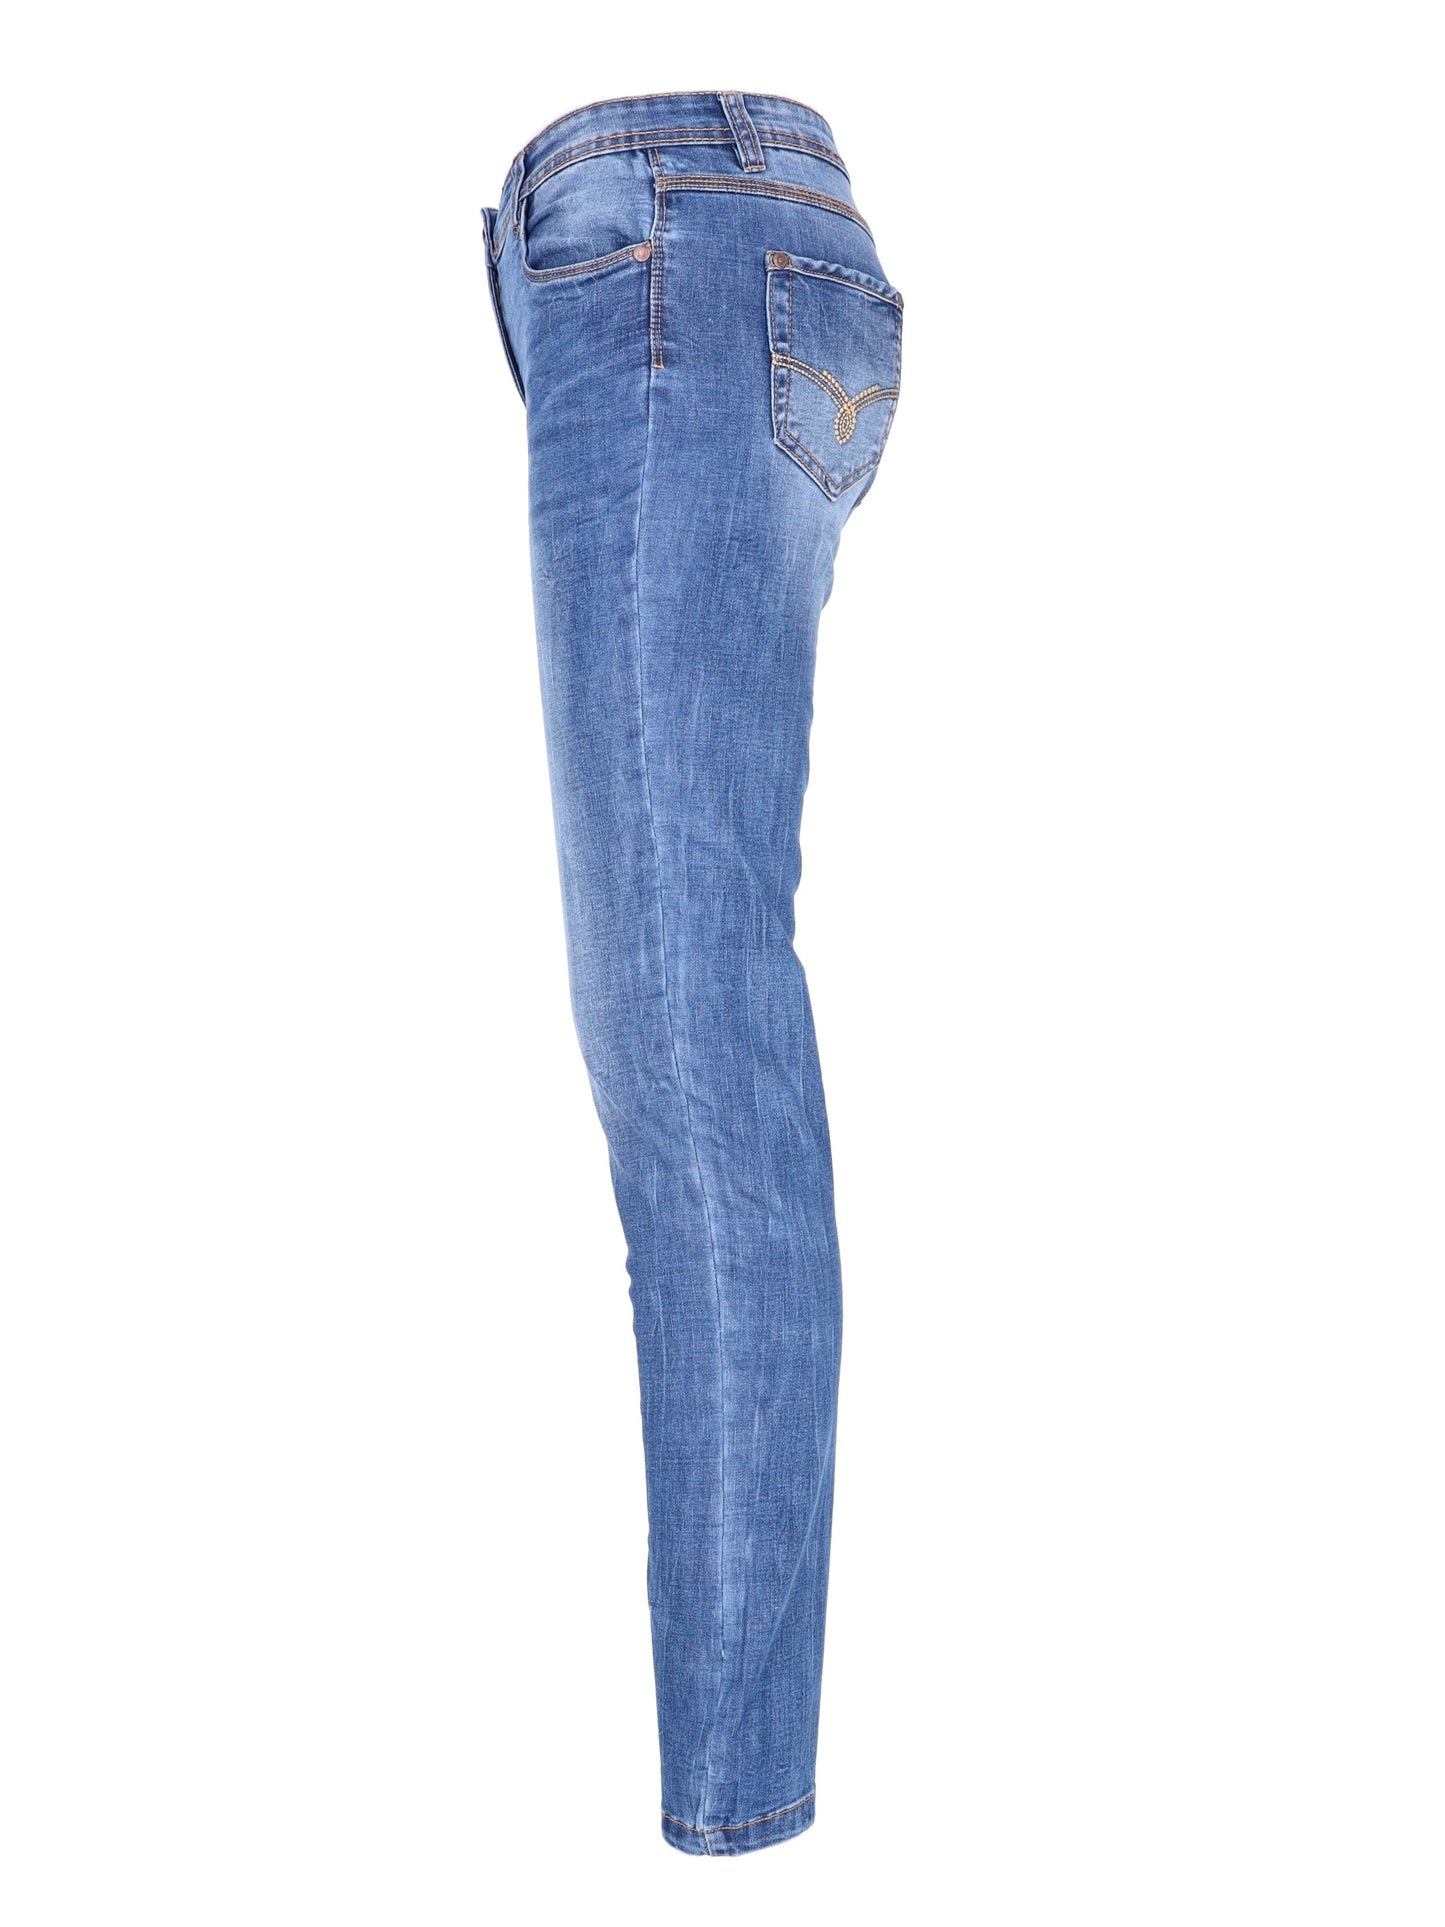 Jeans, straight long